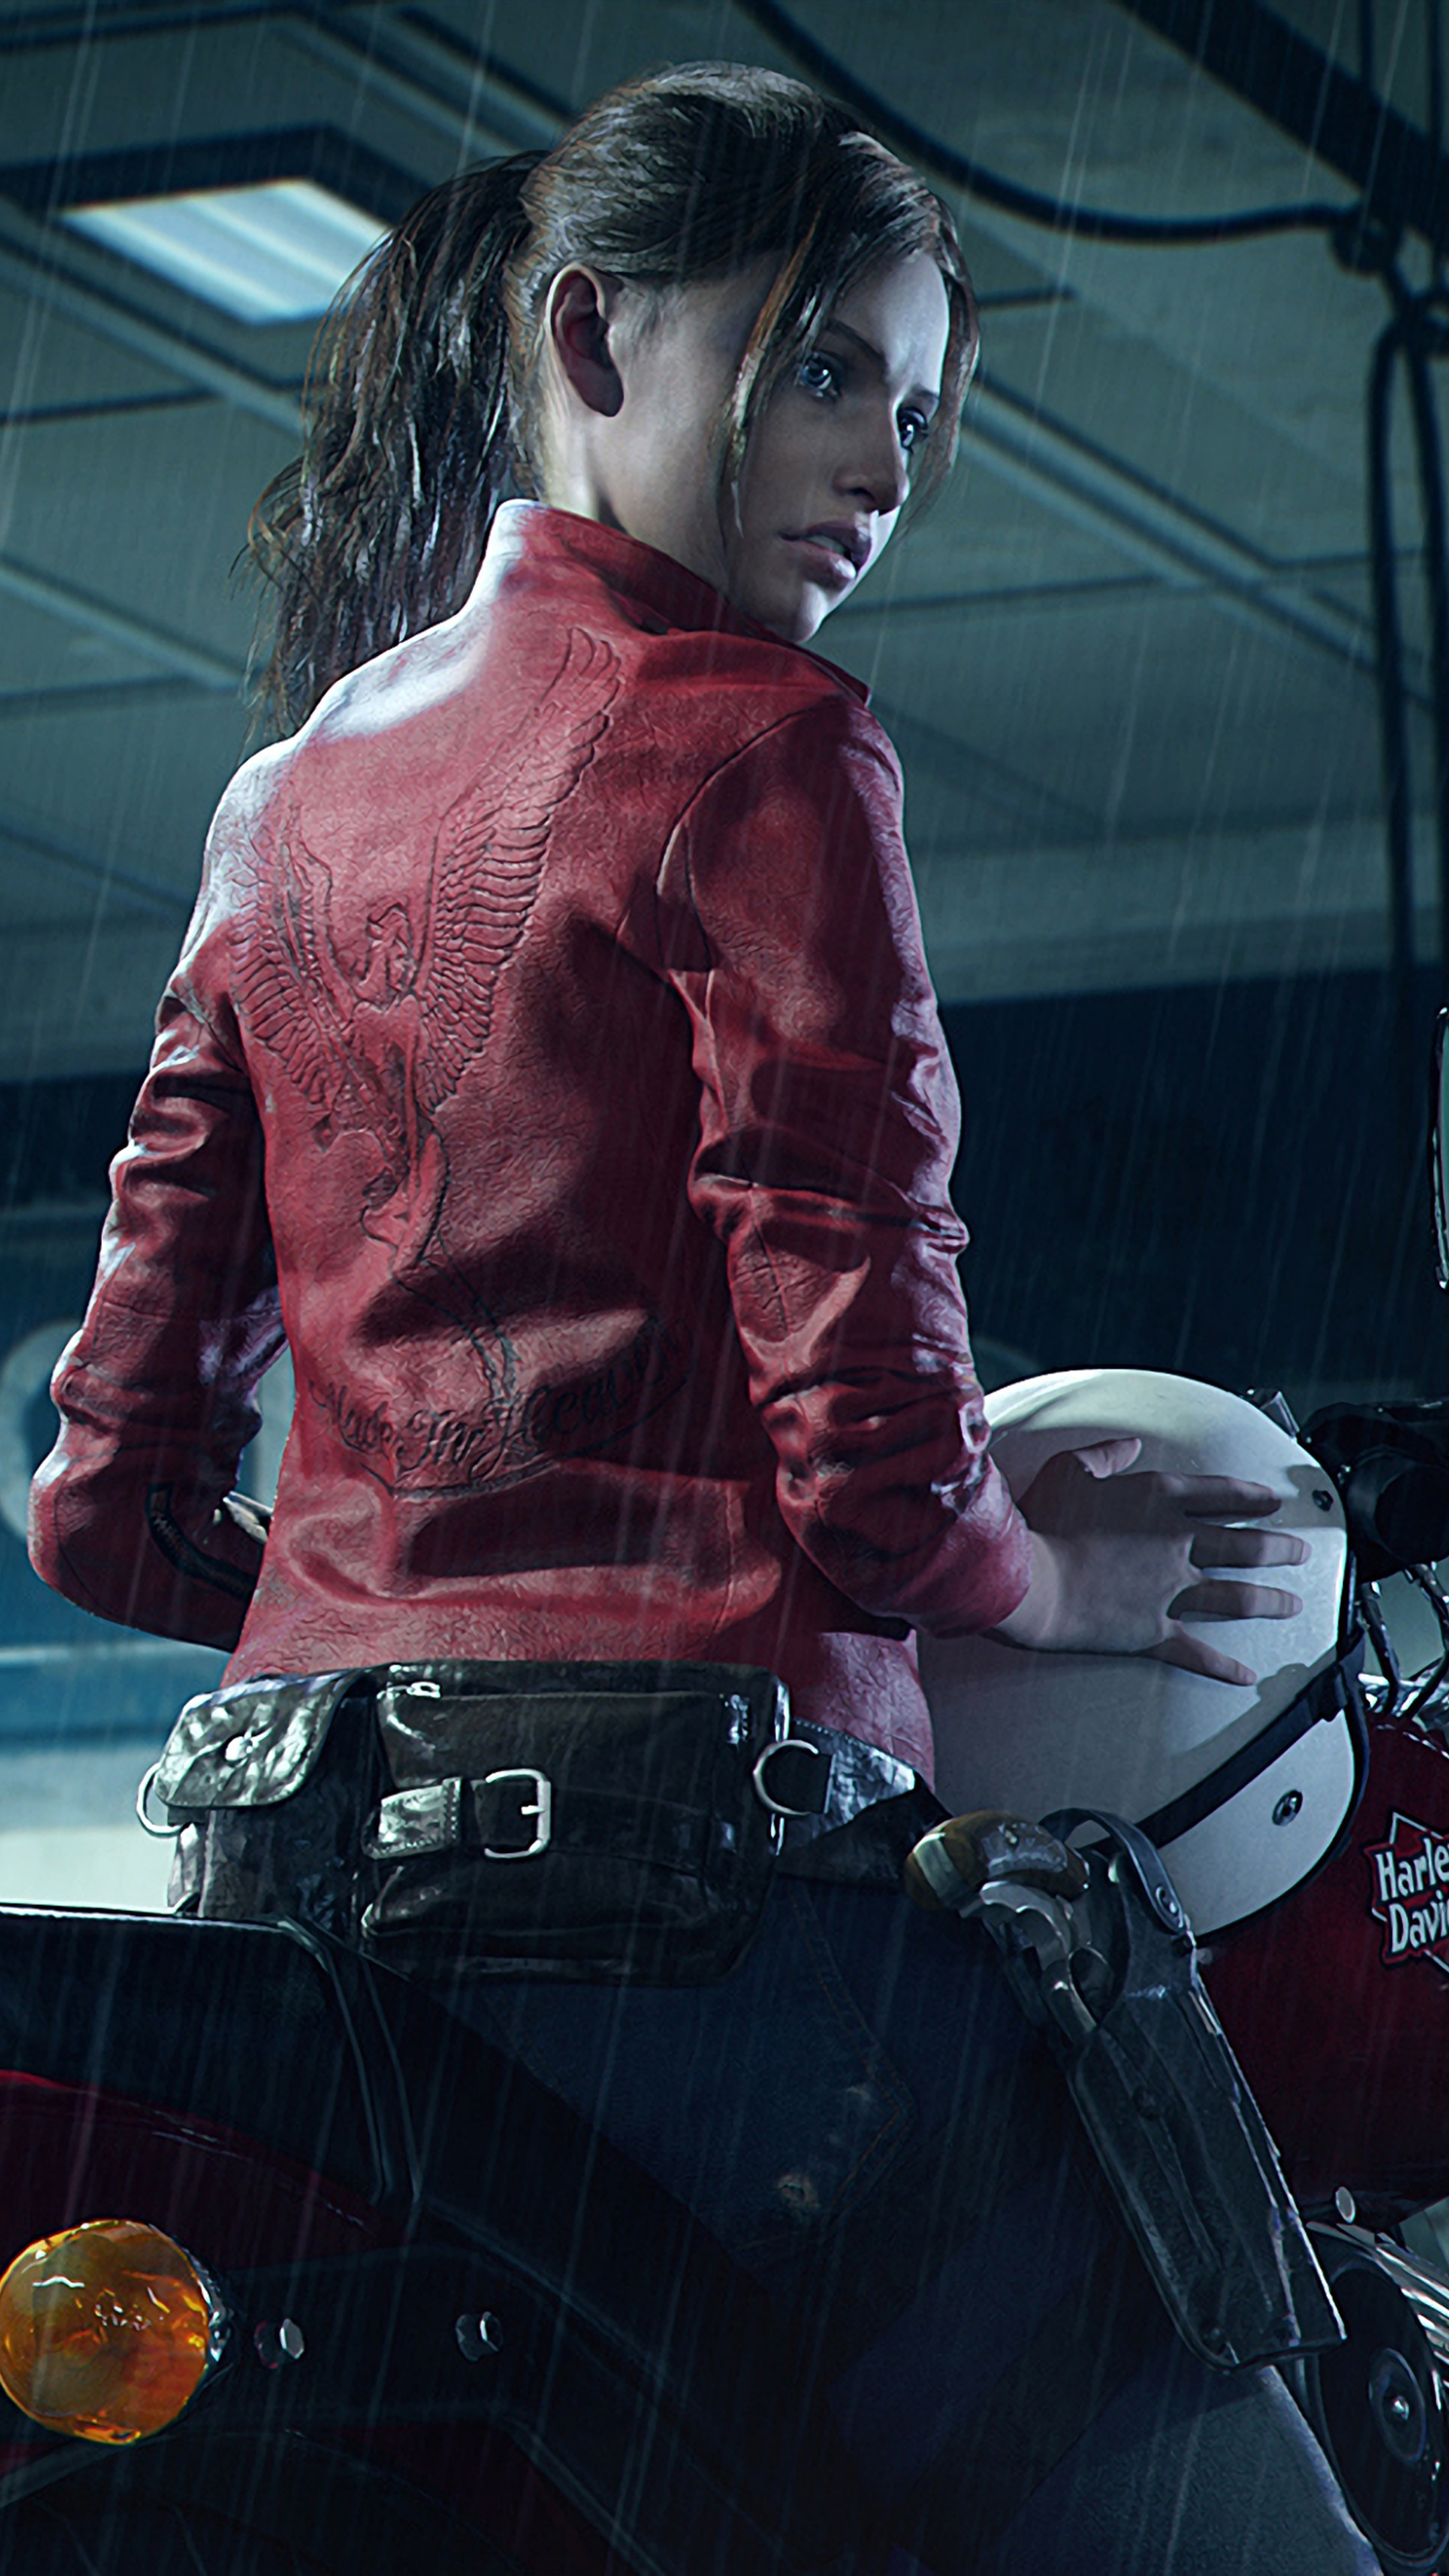 Resident Evil Claire Redfield Wallpaper (73+ images)